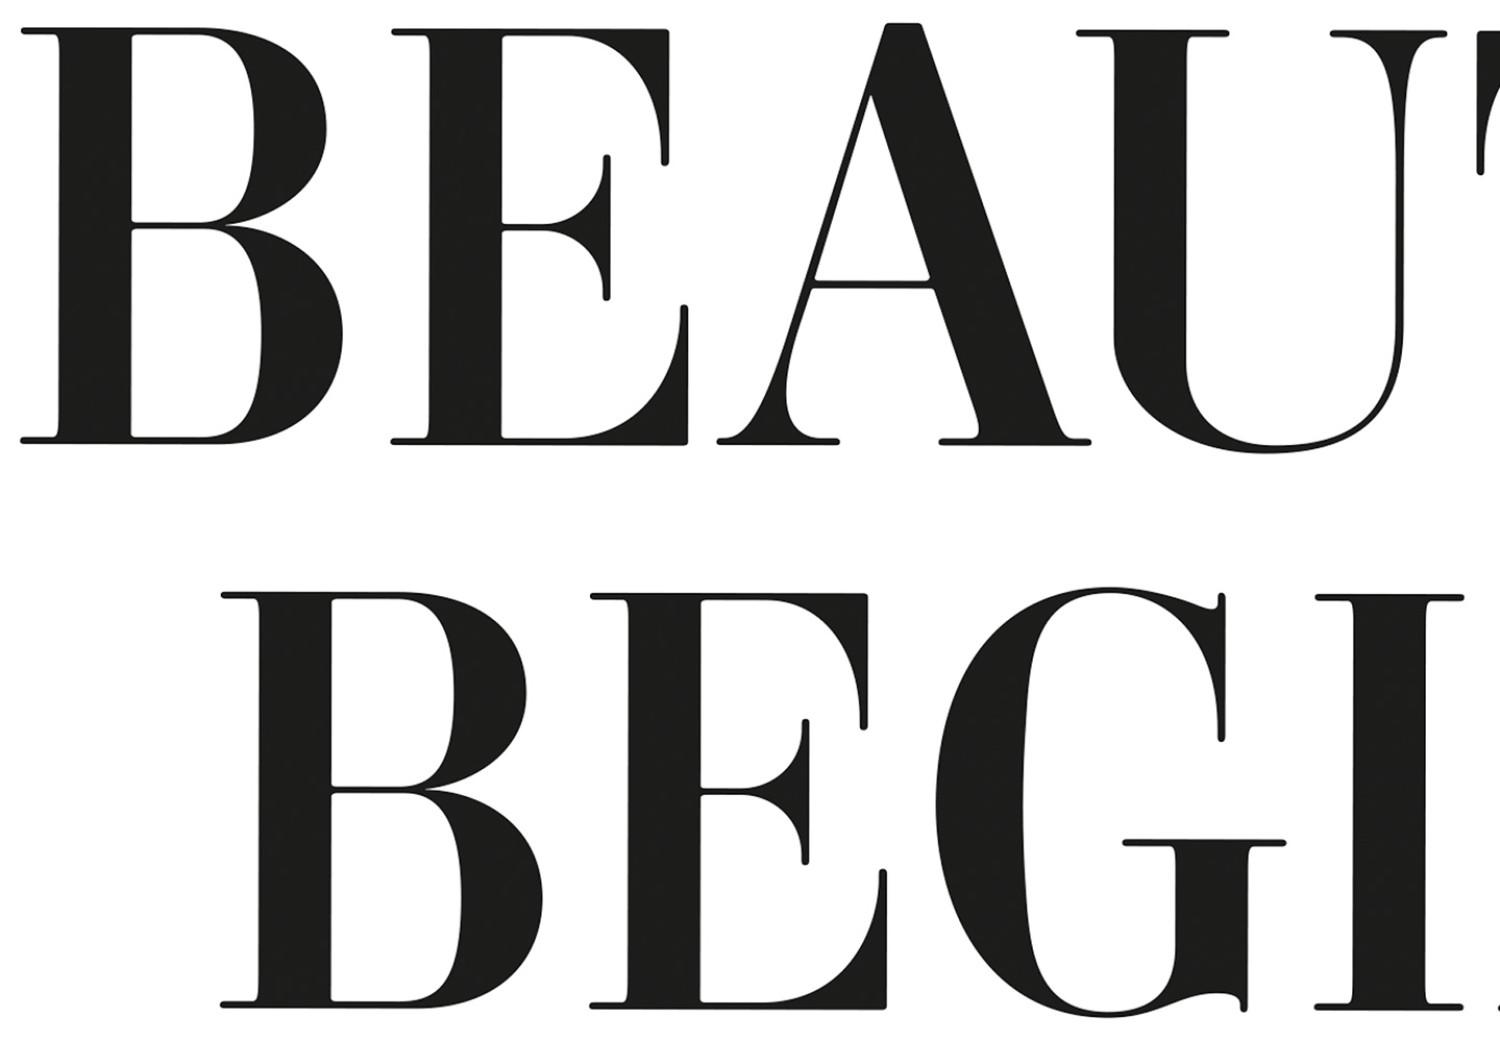 Poster Where Beauty Begins - black English quote on a white background